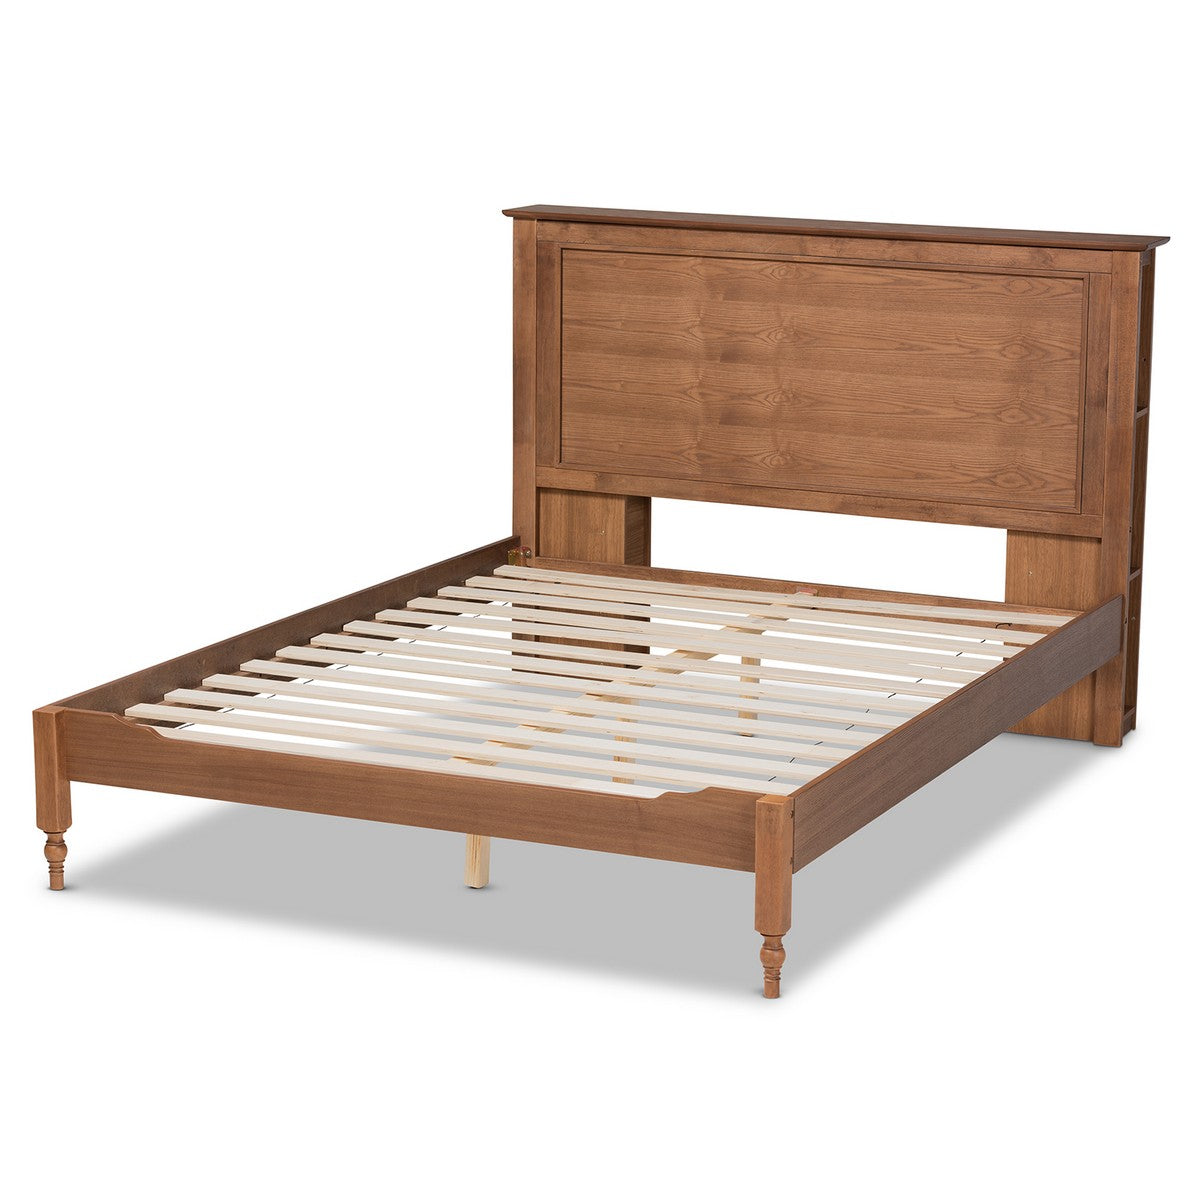 Baxton Studio Danielle Traditional and Transitional Rustic Ash Walnut Brown Finished Wood Queen Size Platform Storage Bed with Built-In Shelves